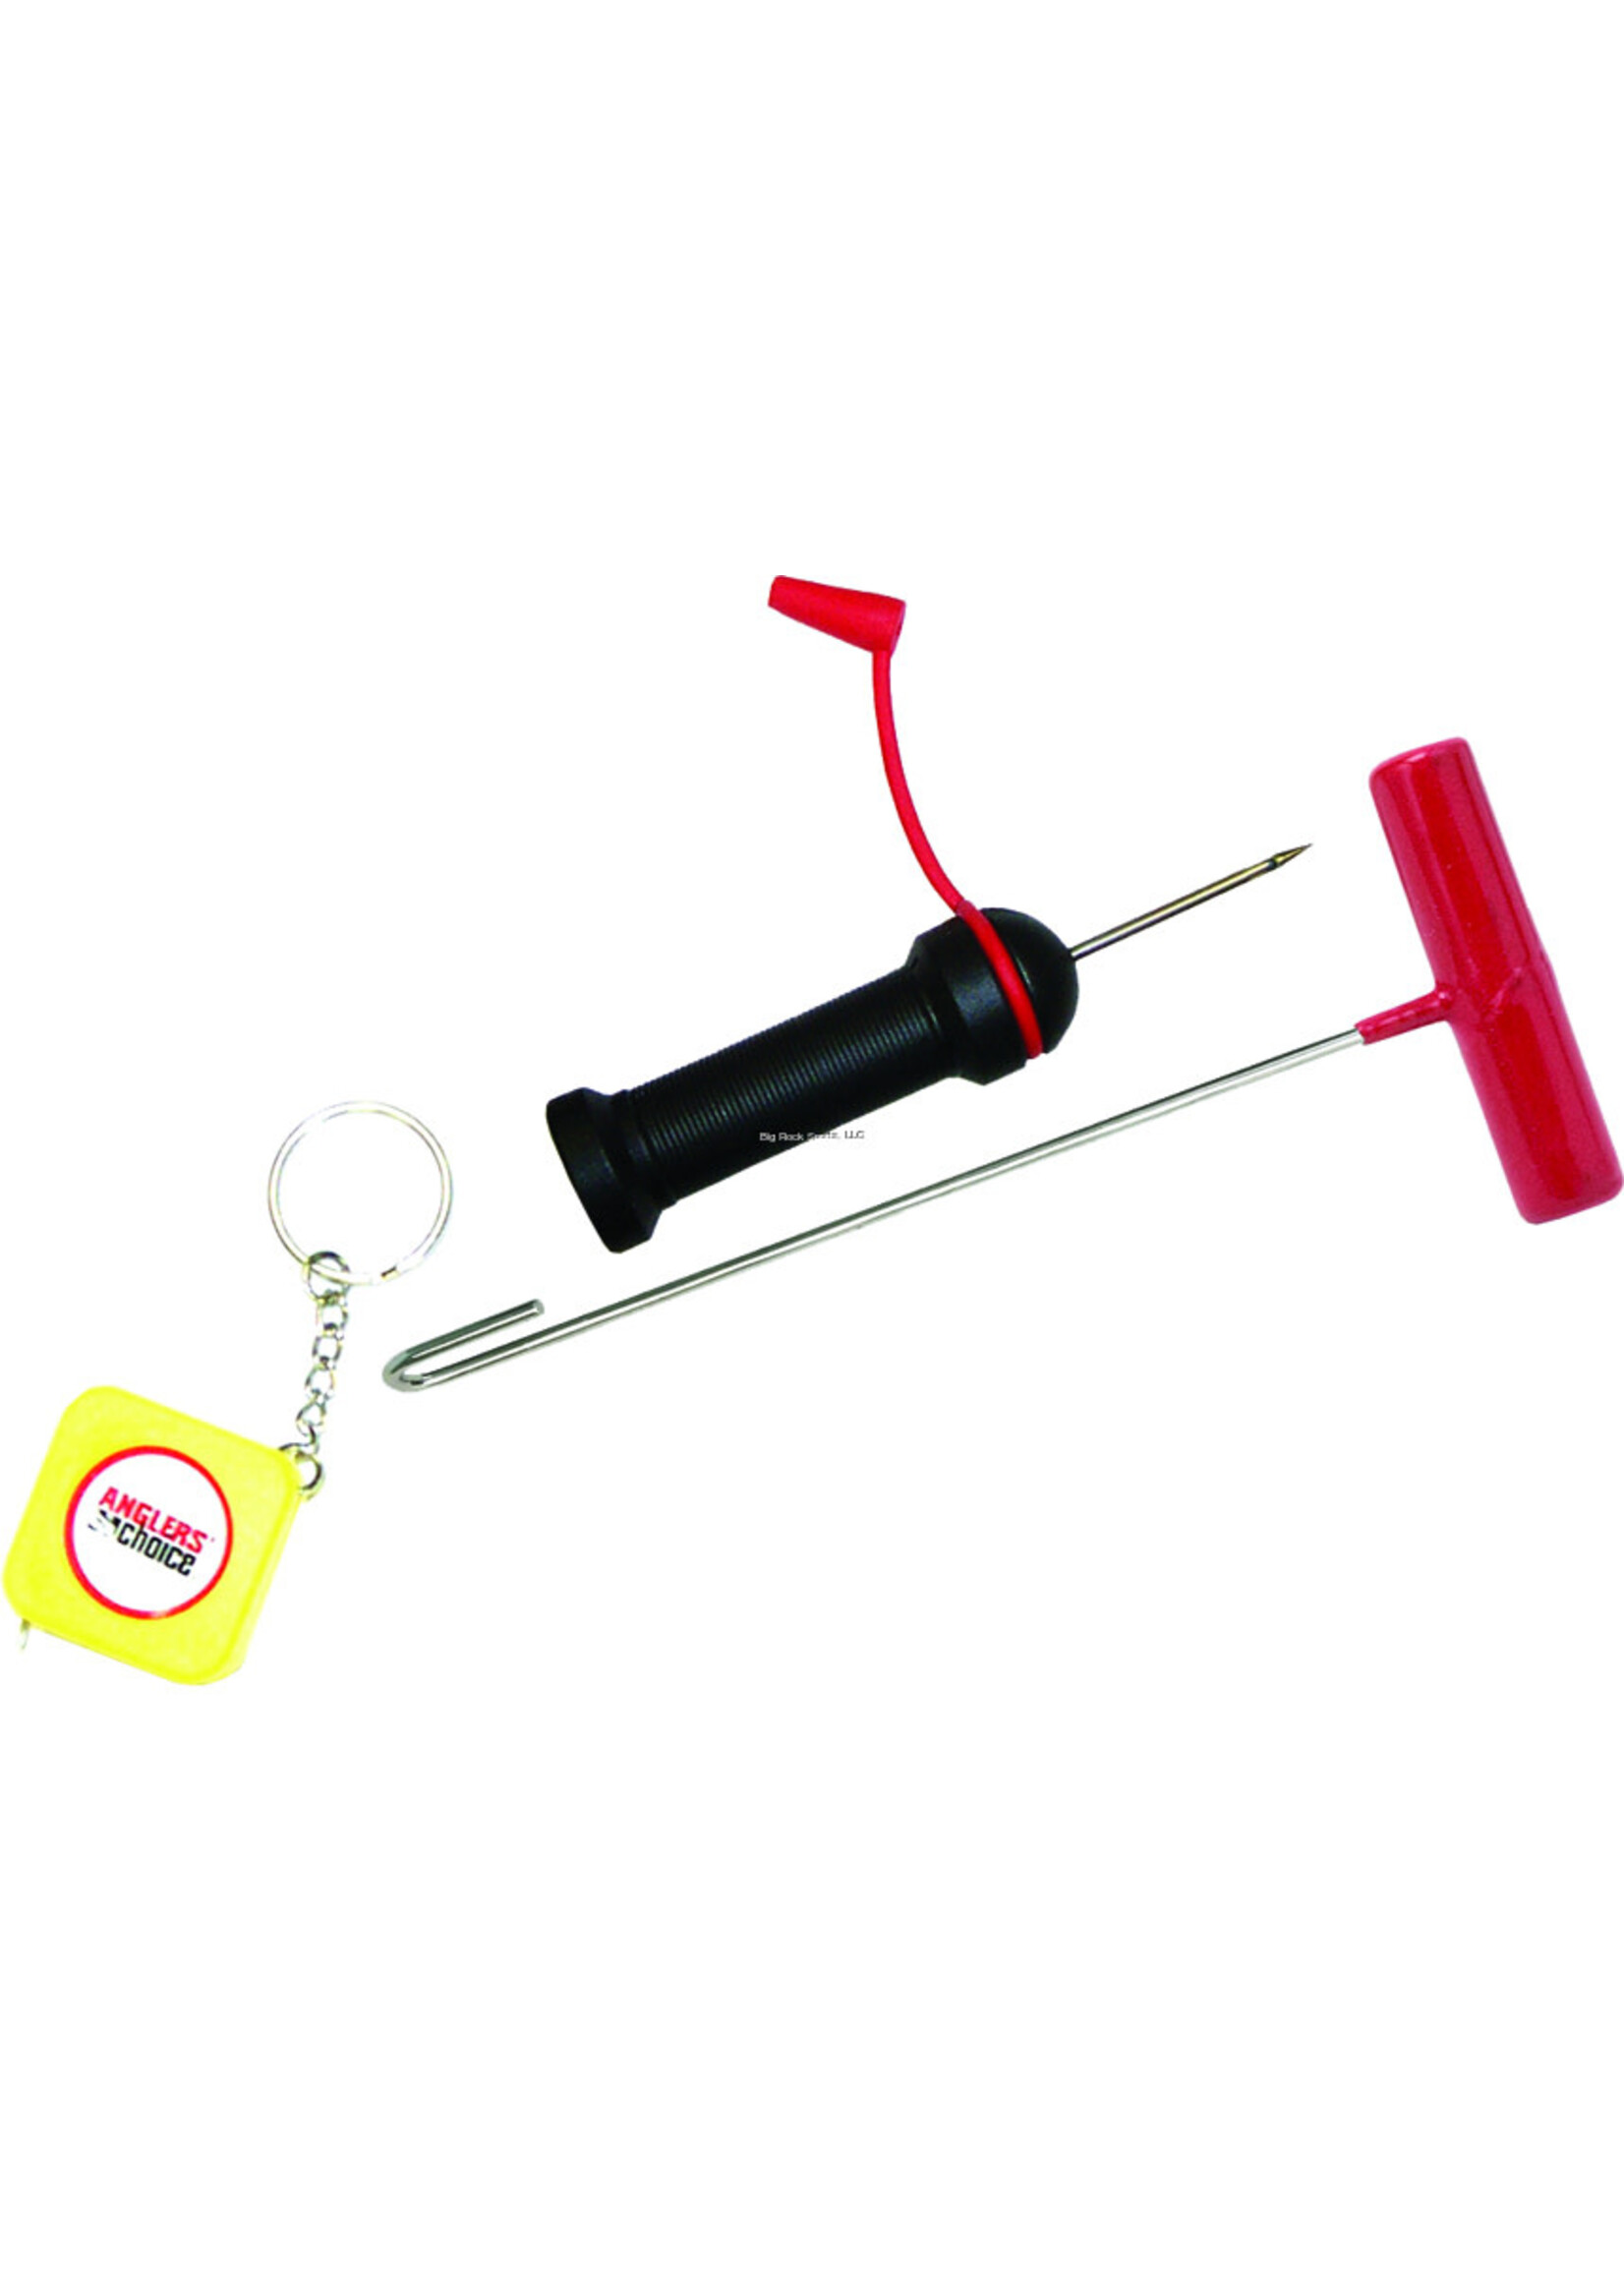 angler's choice Anglers Choice FVHR-03 Venting Kit W/Venting Tool